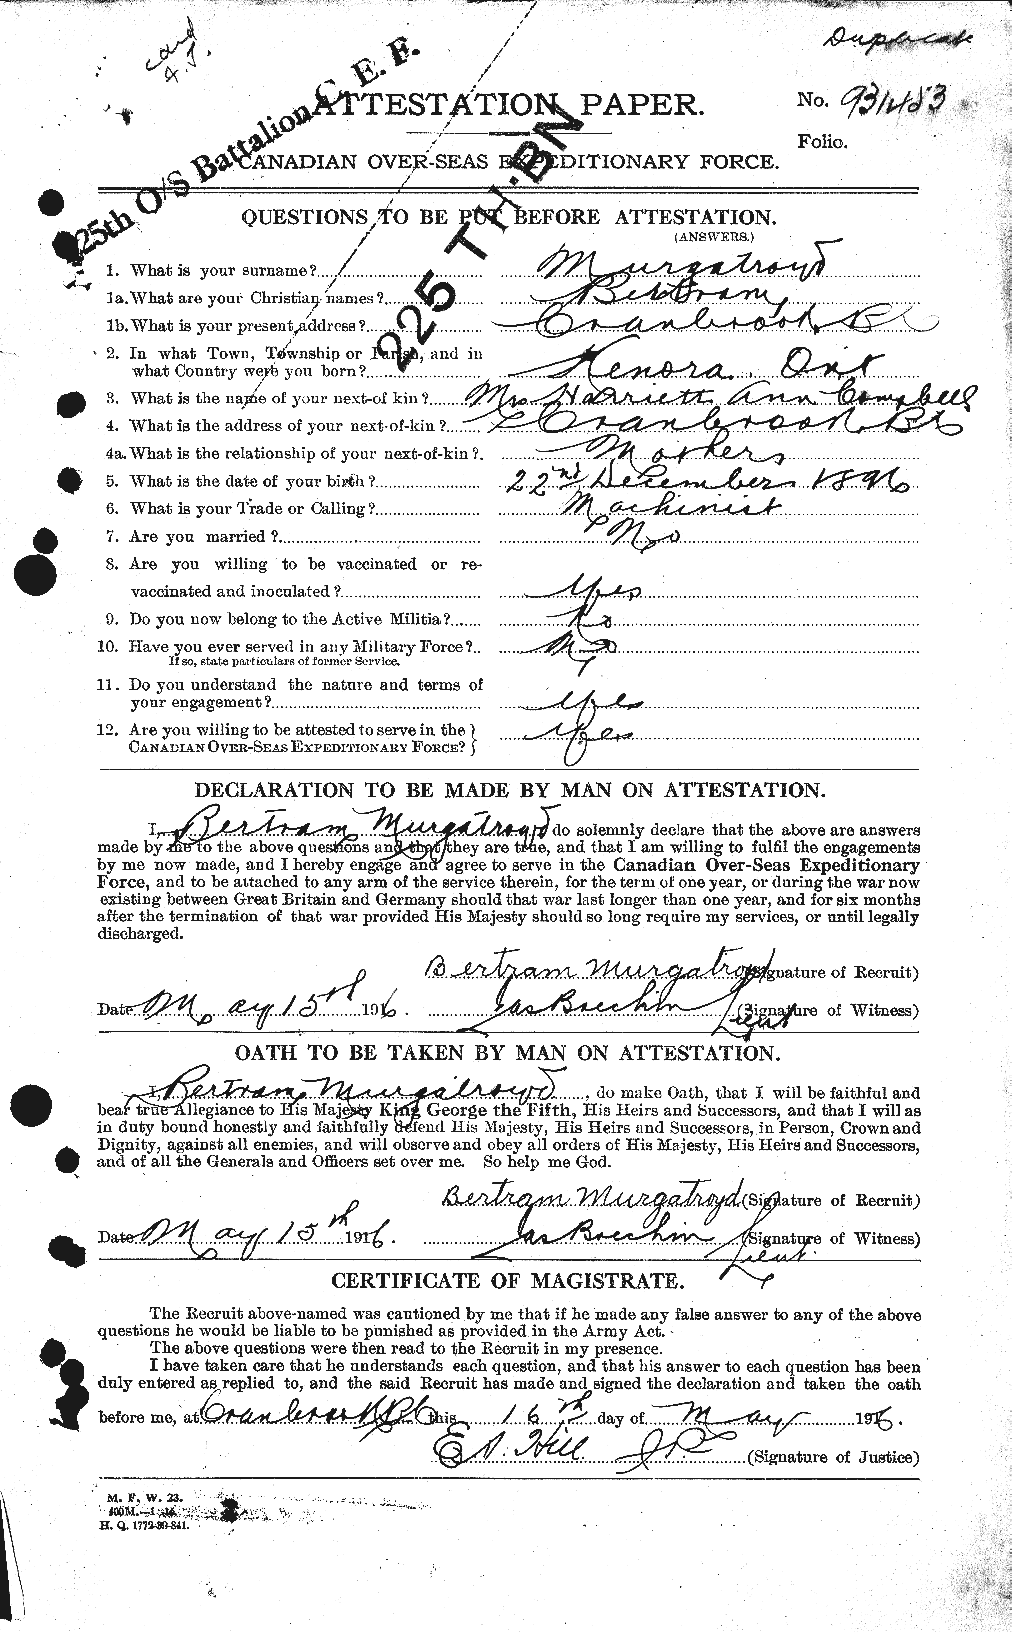 Personnel Records of the First World War - CEF 512573a